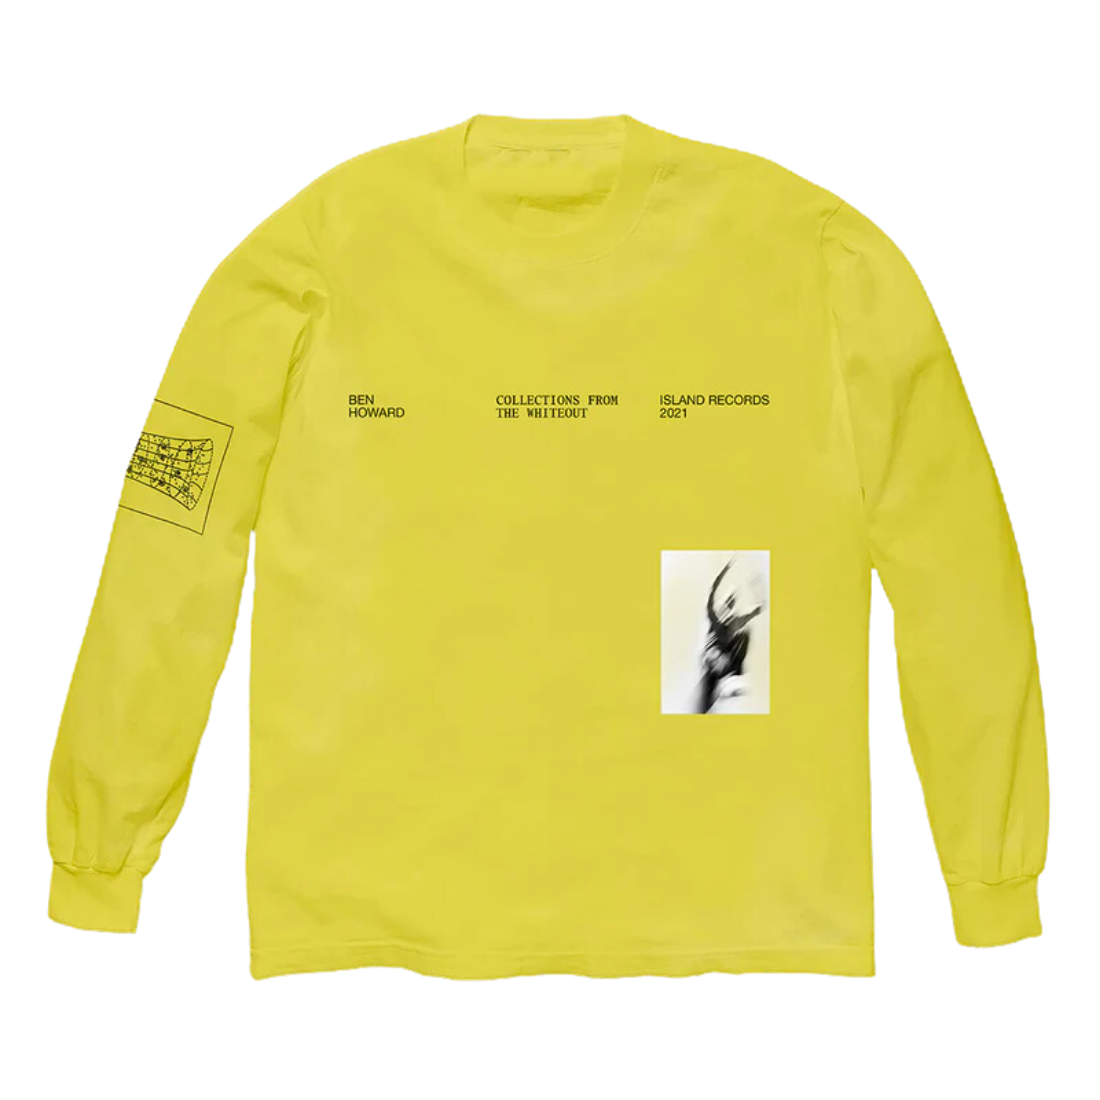 Ben Howard - Collections From The Whiteout: Ben Howard x Island Records: Yellow Longsleeve